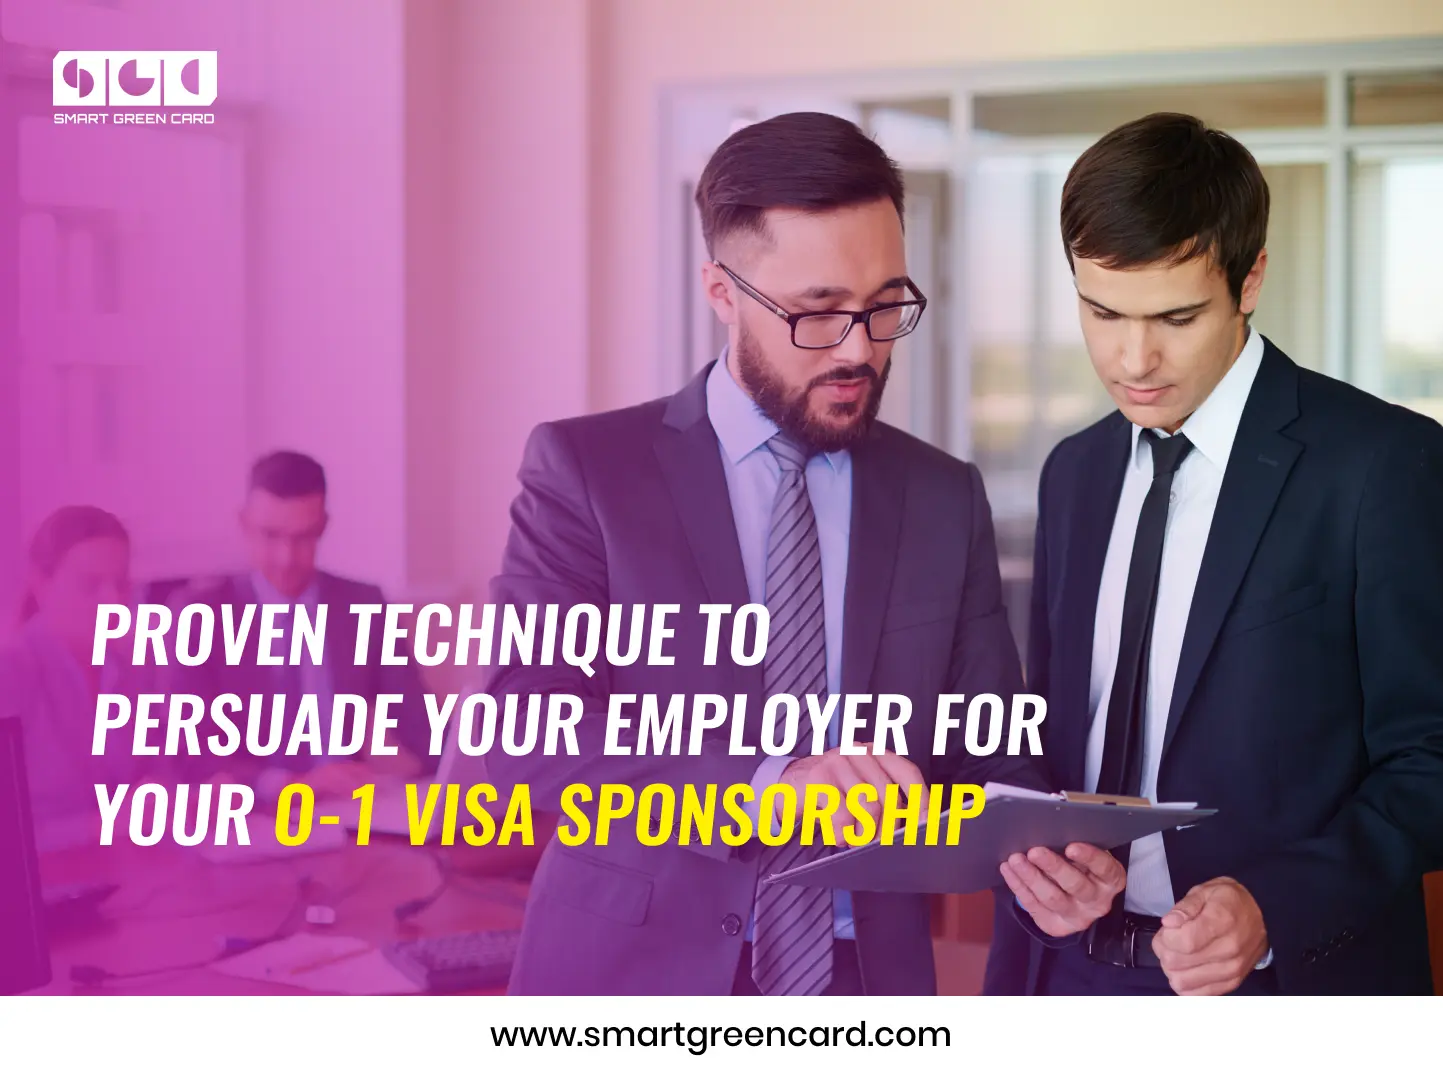 How to Convince Your Employer for Your O1 Visa Sponsorship?